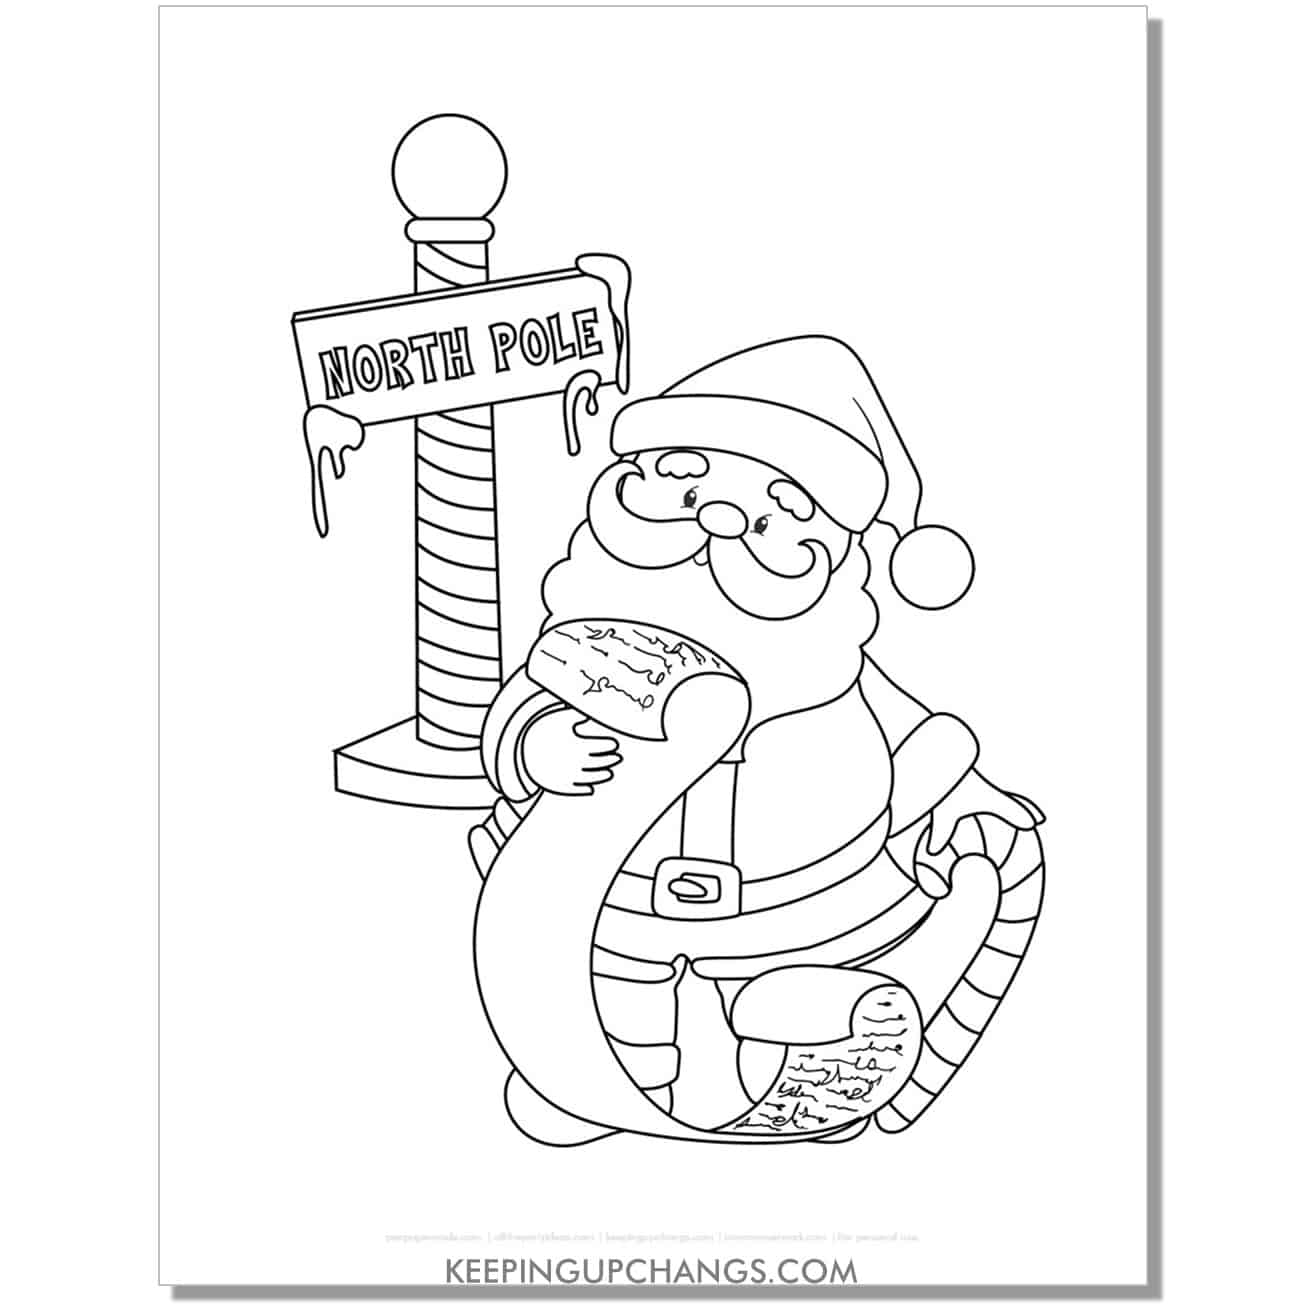 free adorable north pole santa with naughty nice list coloring page.